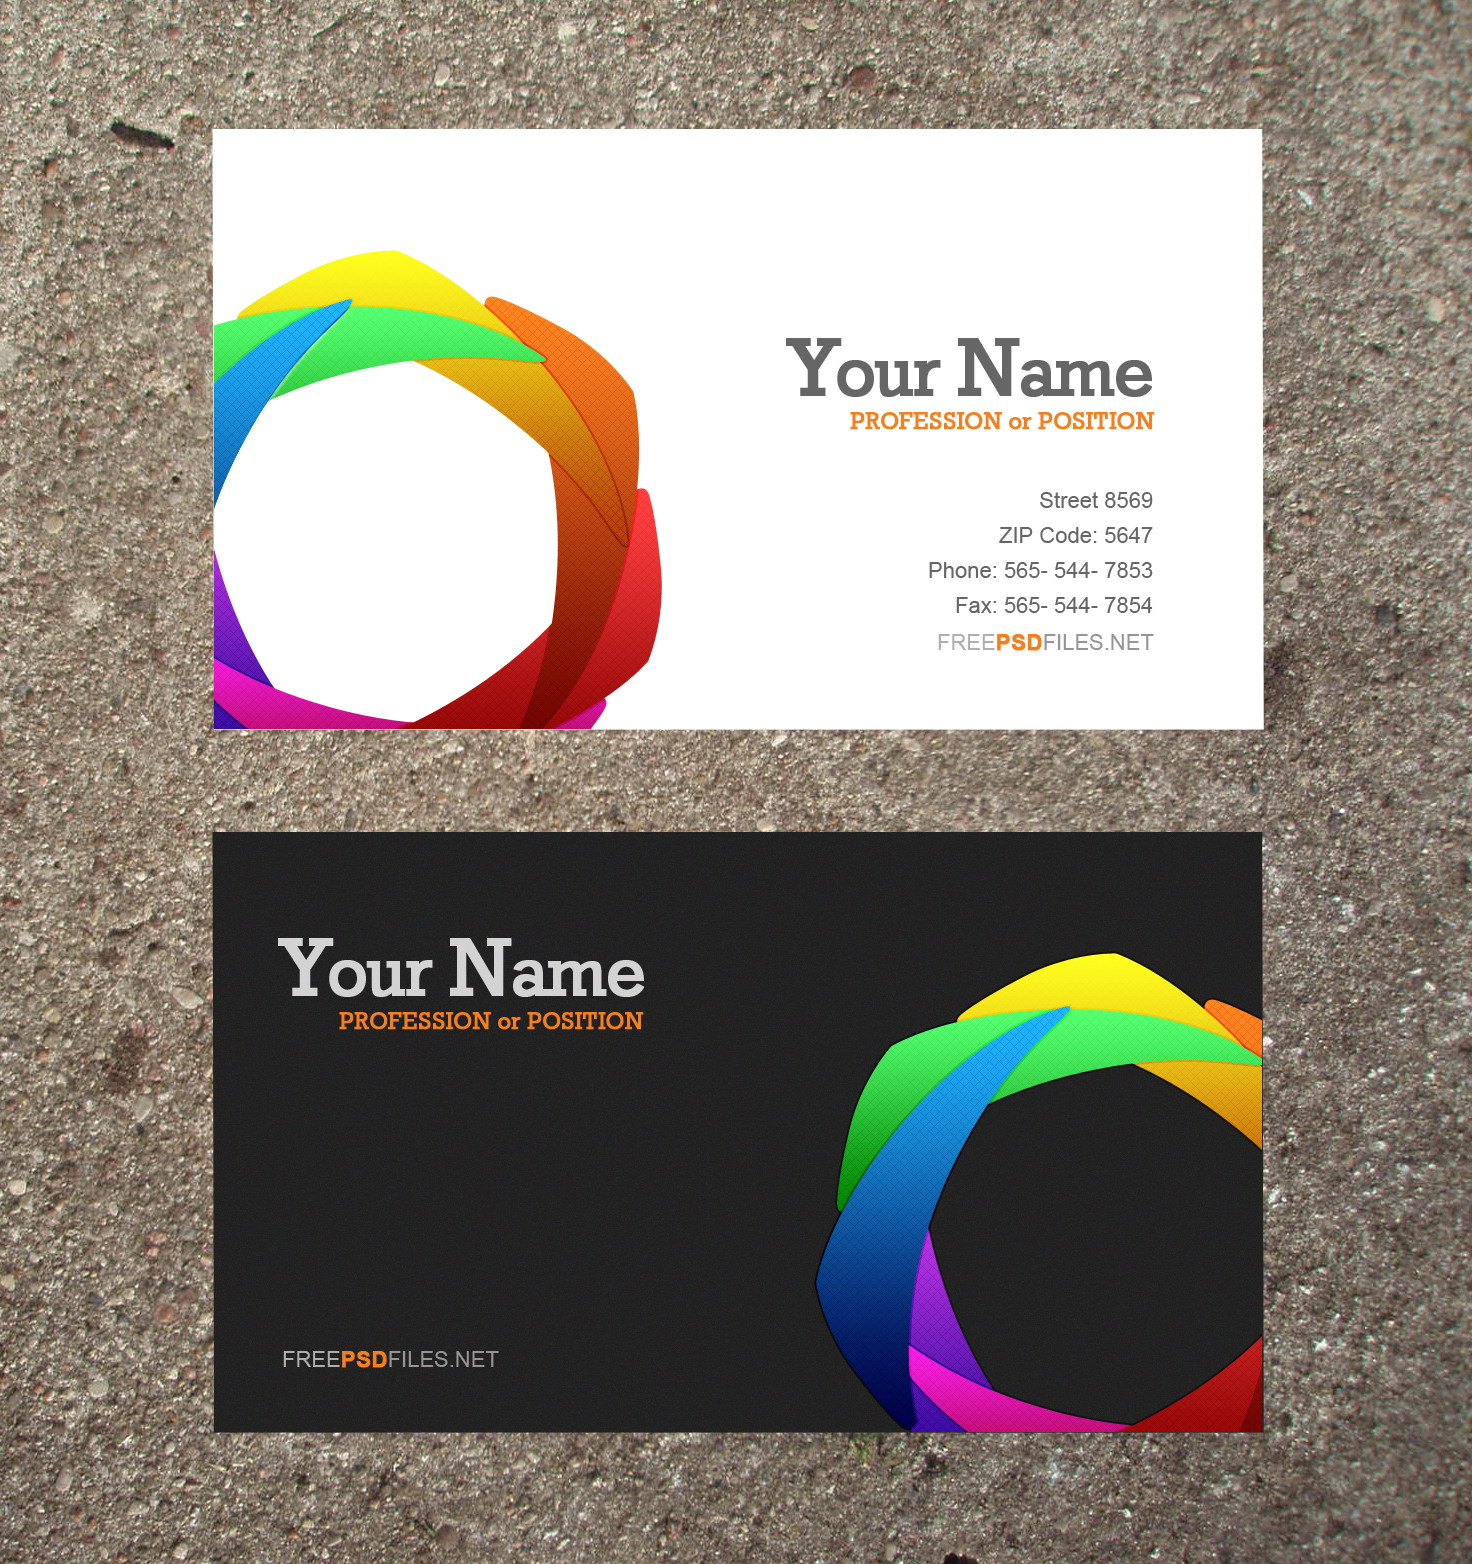 17 Business Cards Templates Free Downloads Images Free Business Card 